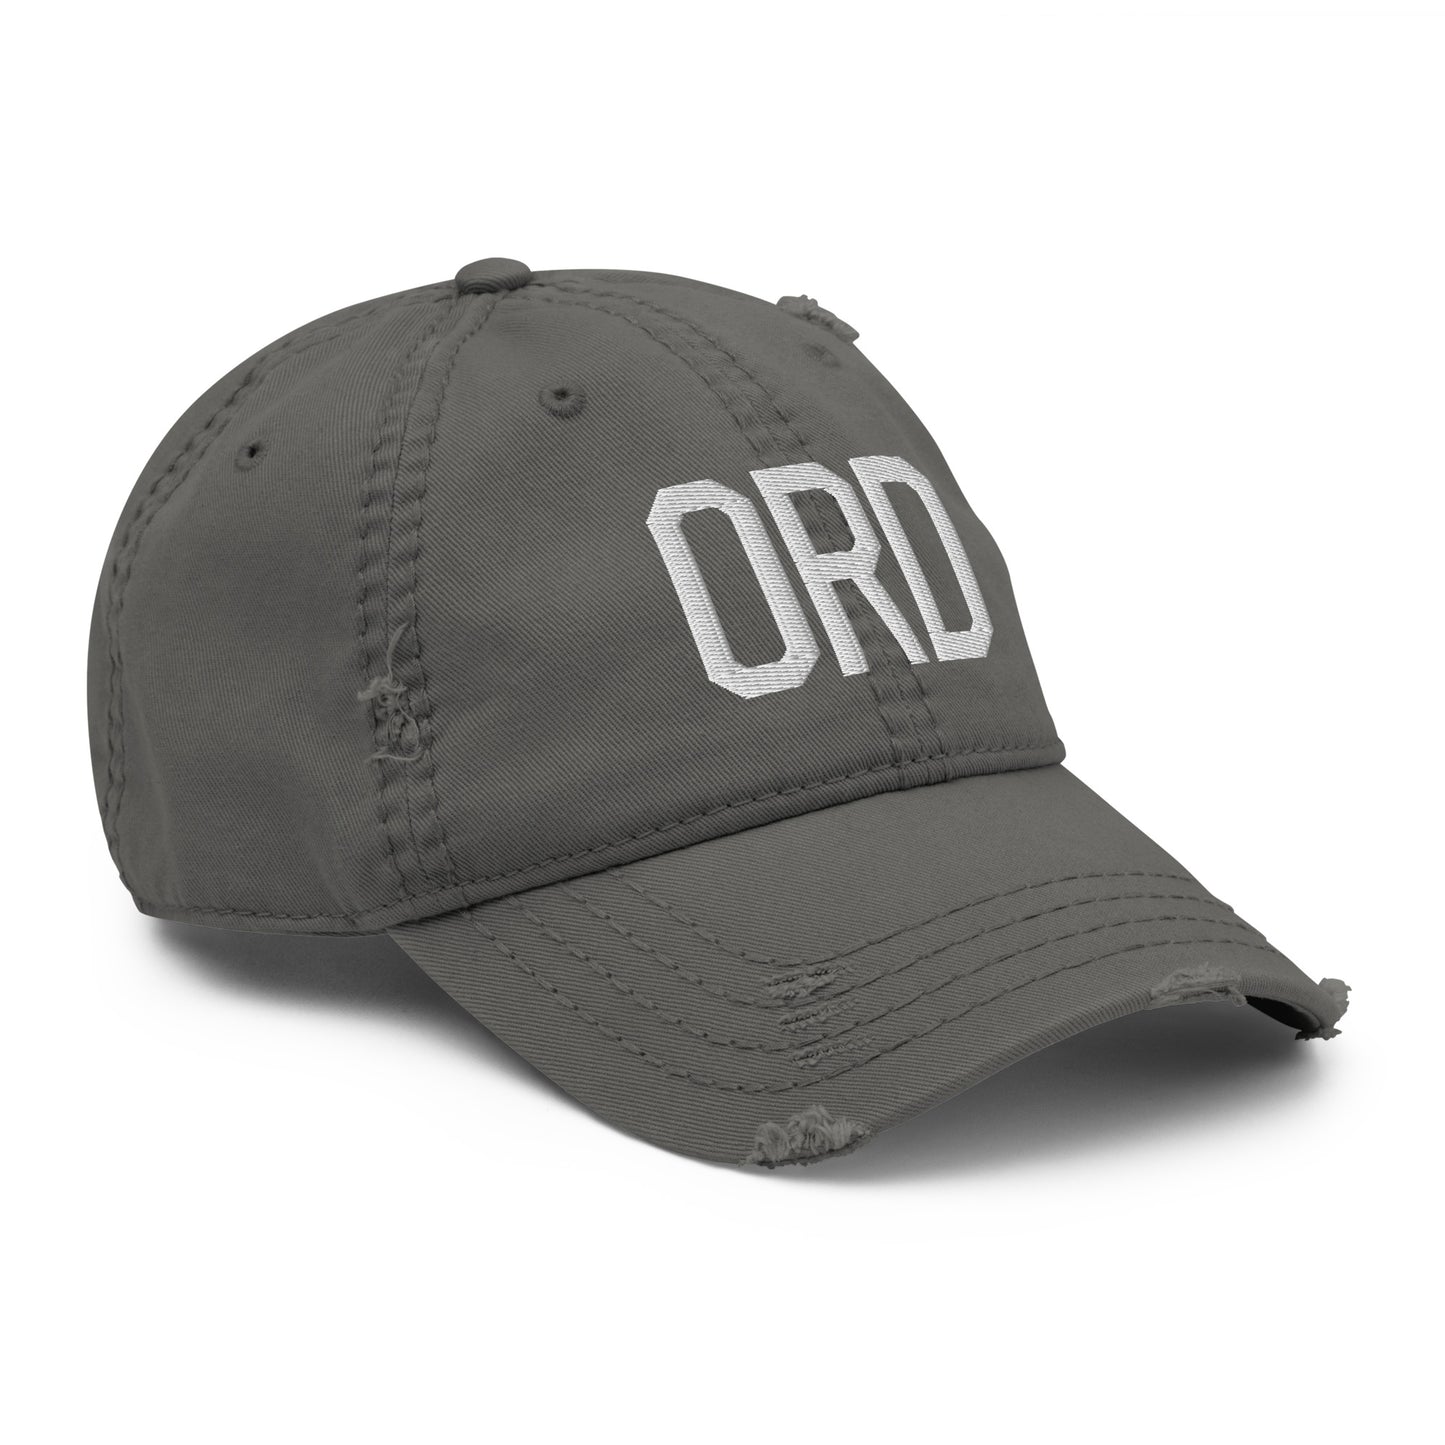 Airport Code Distressed Hat - White • ORD Chicago • YHM Designs - Image 17